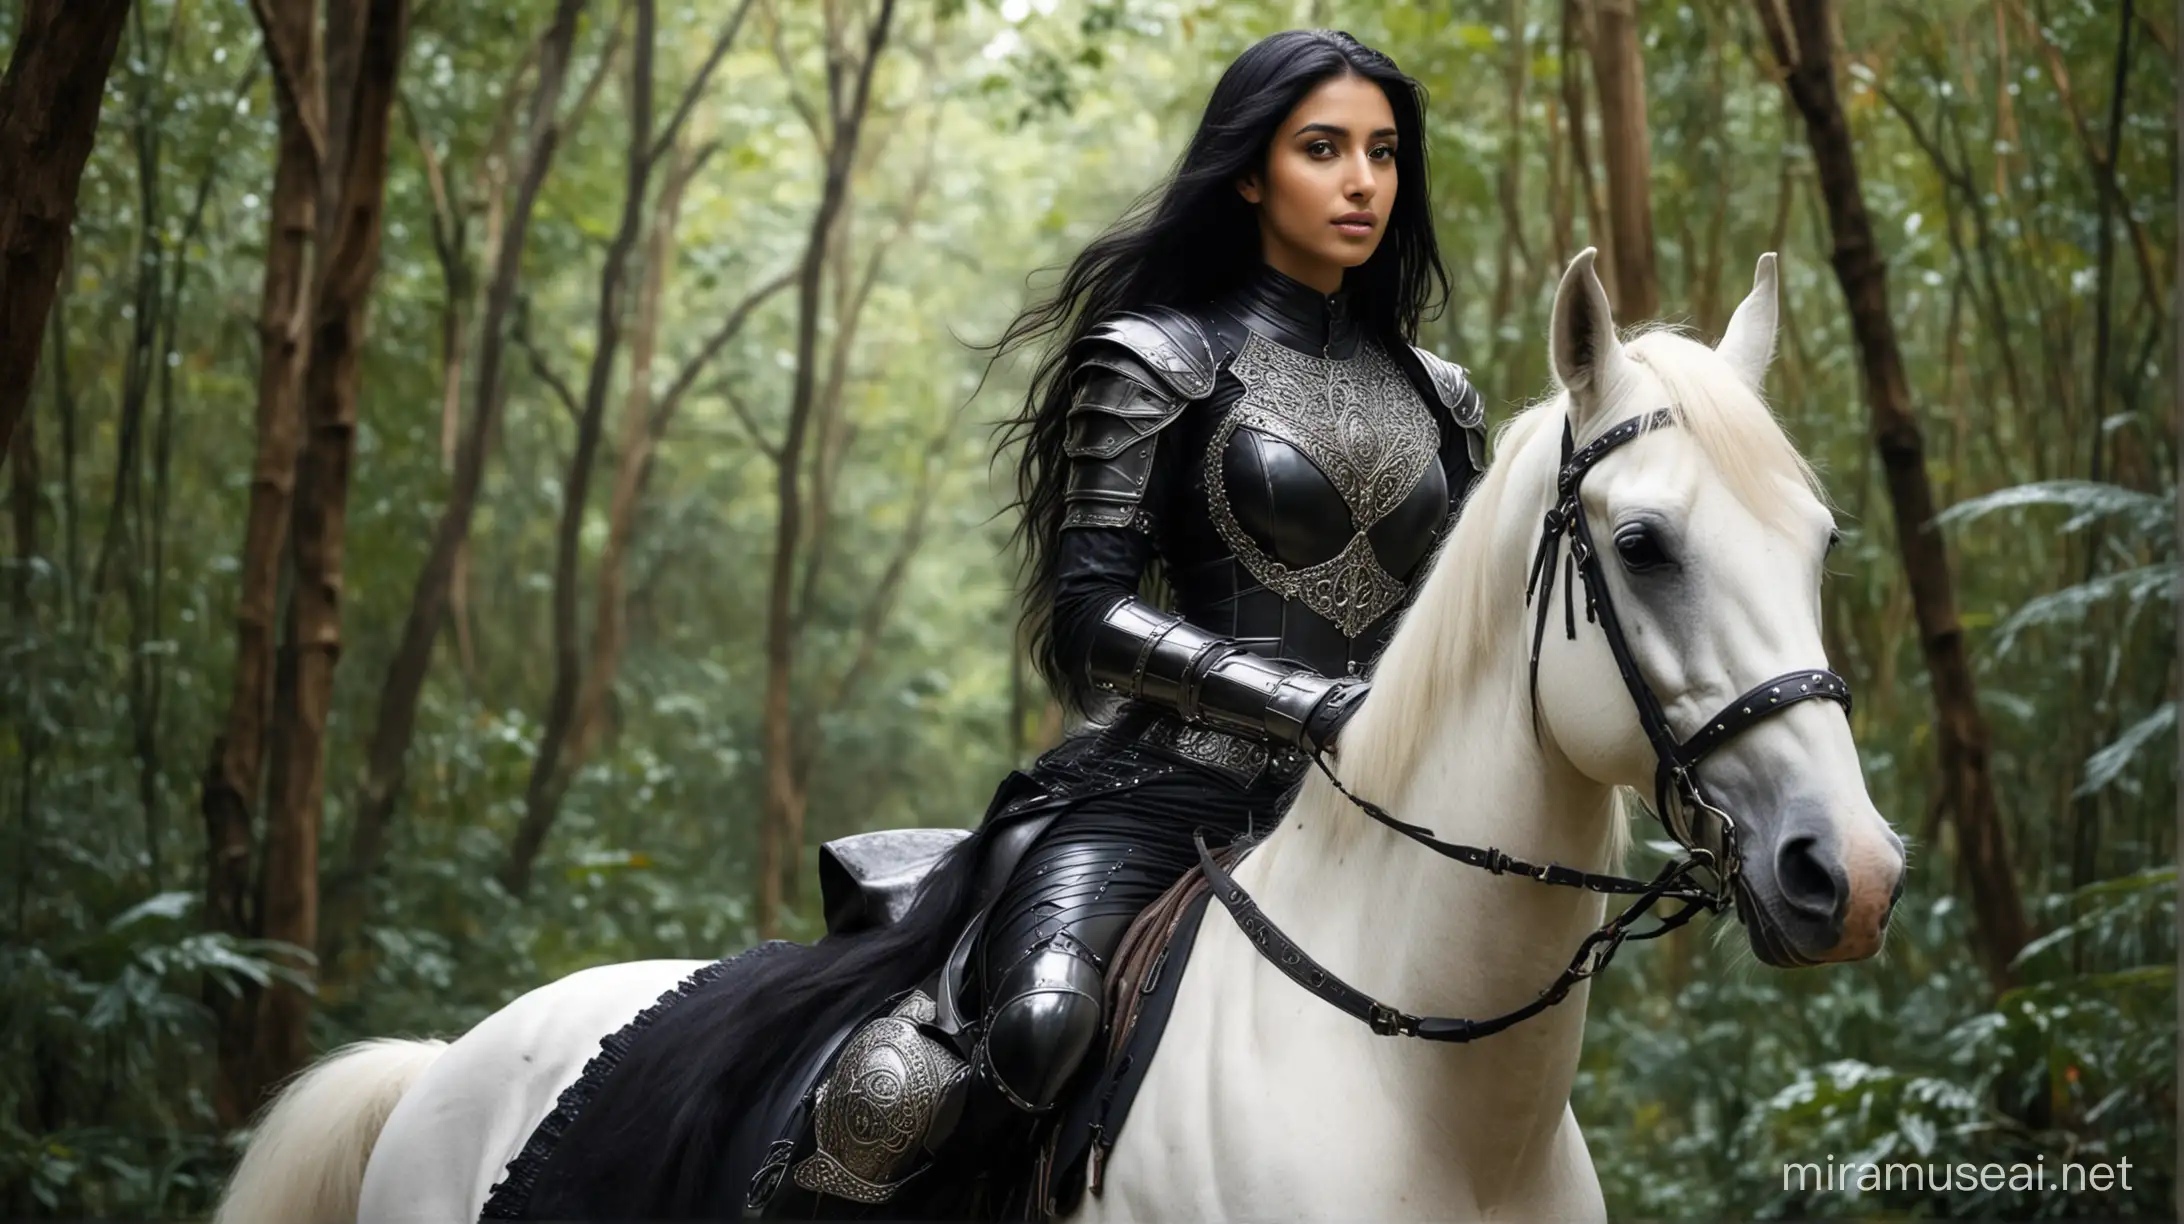 Arab Woman in Black Knight Armor Riding White Horse in Indian Rainforest